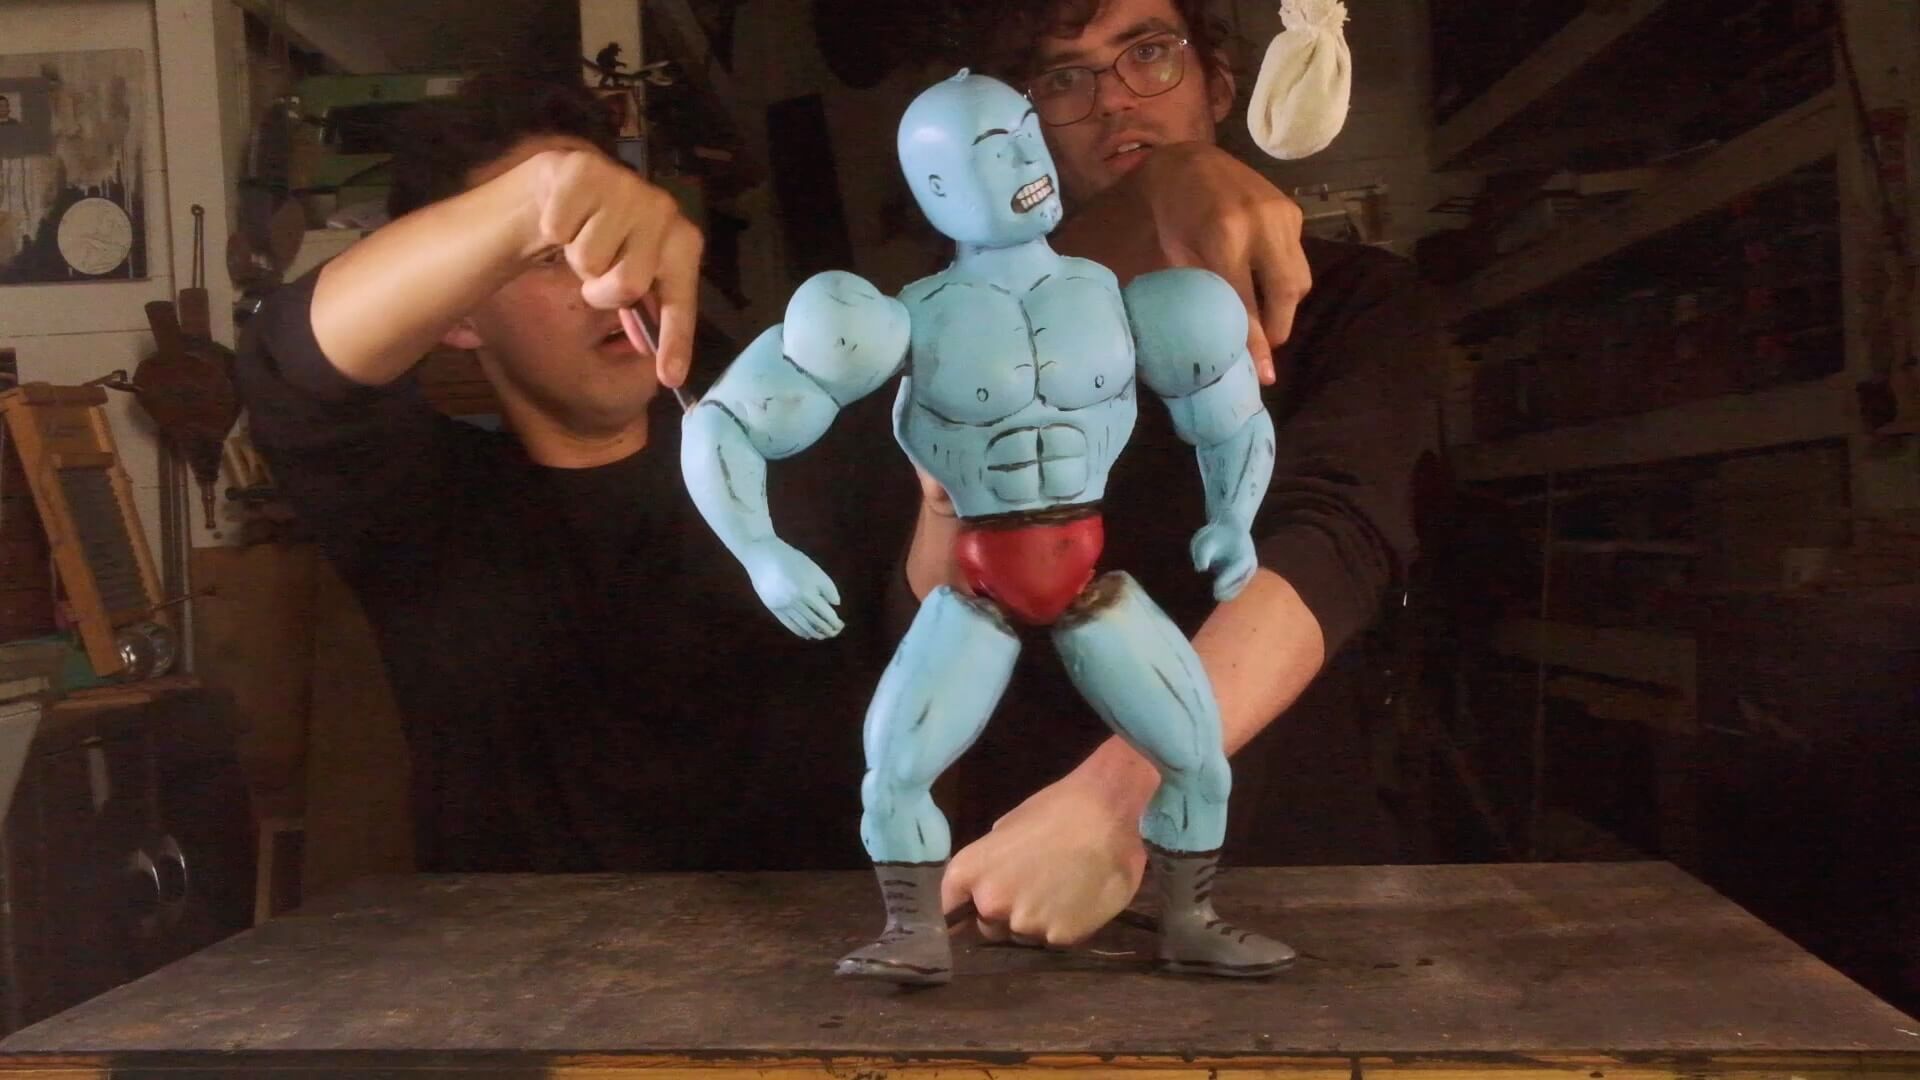 Two young men dressed in black use metal rods and work together to pose a 15-inch-tall foam puppet that looks like a bald, muscular, blue-skinned bodybuilder or professional wrestler, wearing red briefs and black boots. The puppet is scowling and staring up at a miniature white slip bag, or punching bag, used by boxers for training.